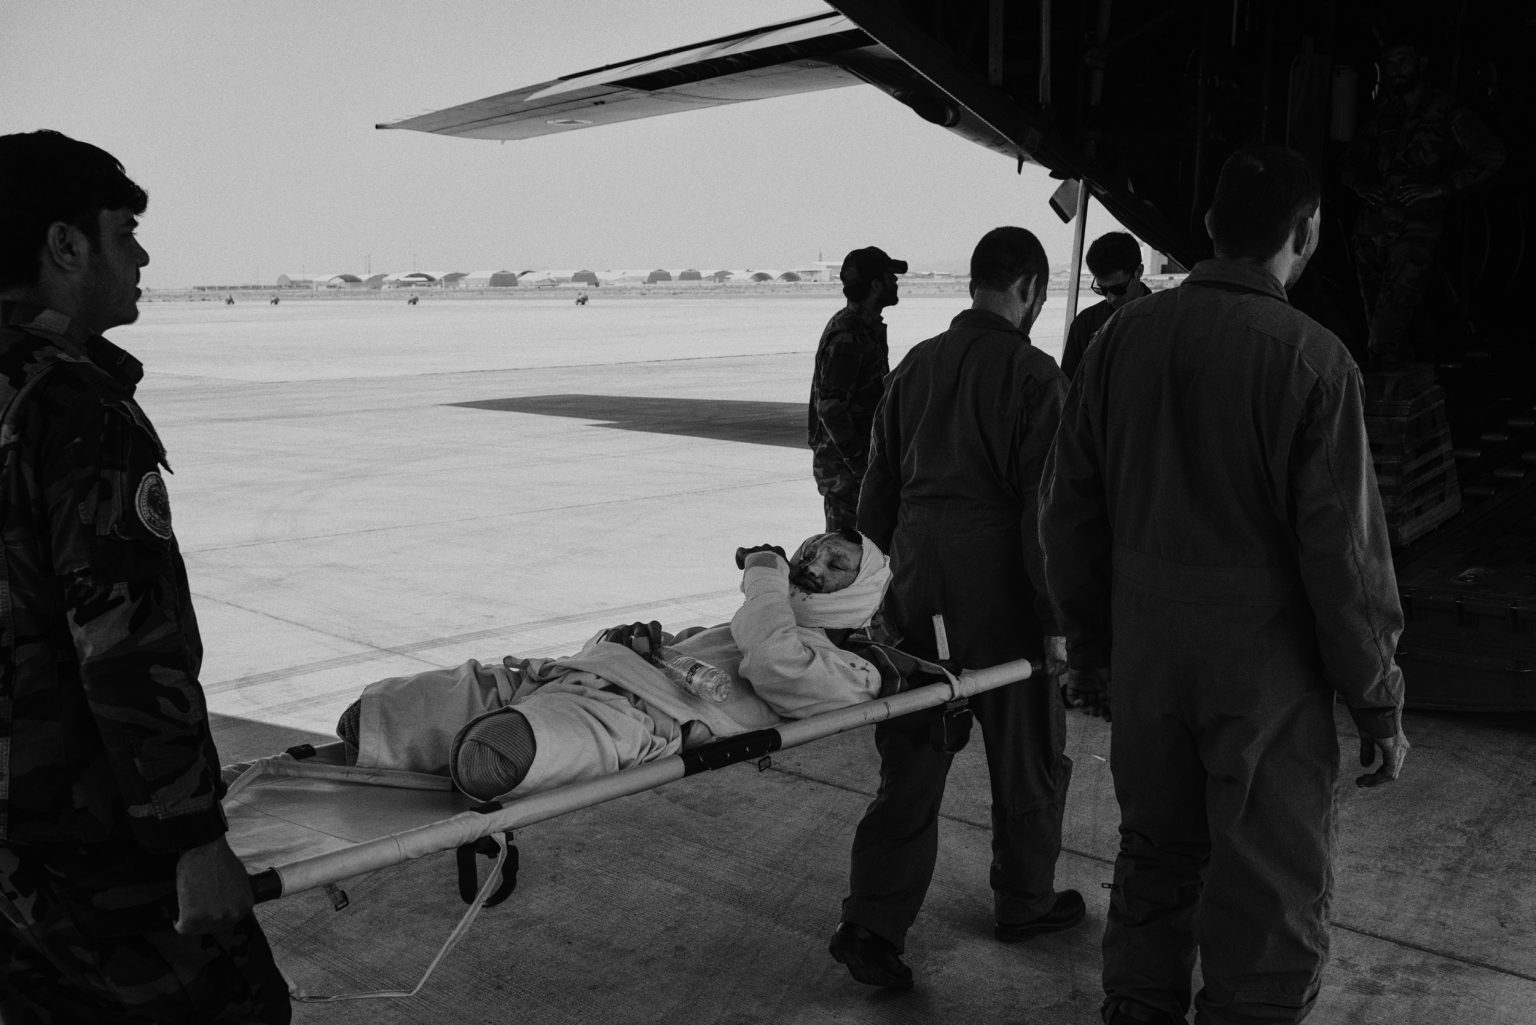 LASHKAR GHA, AFGHANISTAN - MAY 27, 2021:
A member of the Afghan security forces, injured during the fighting, is evacuated on a military flight from Kandahar airfield to Kabul.
After American troops began leaving Afghanistan in early May the Taliban mounted an offensive in the southern city of Lashkar Gha. Afghan security forces were struggling to hold the besieged city.

(Photo by Lorenzo Tugnoli/ Washington Post/ Contrasto)